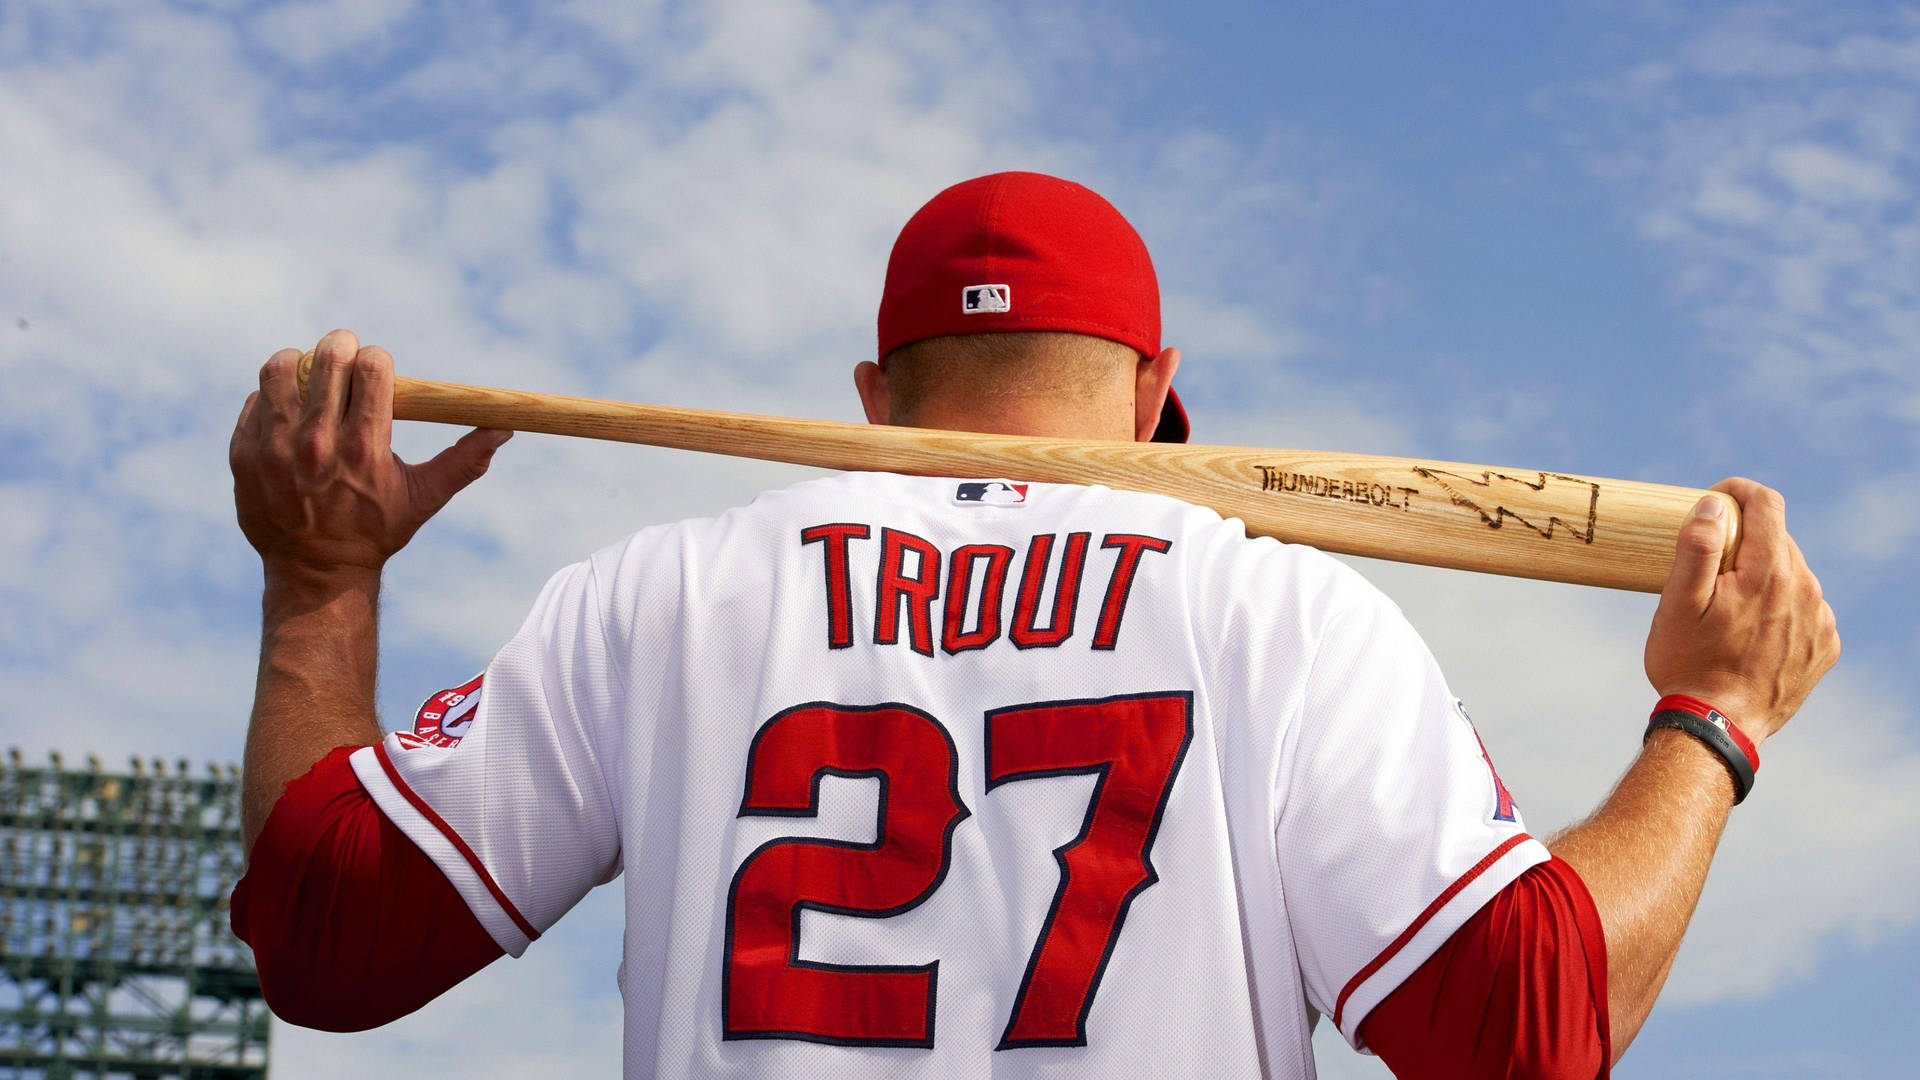 Los Angeles Angels Mike Trout Baseball Bat Background